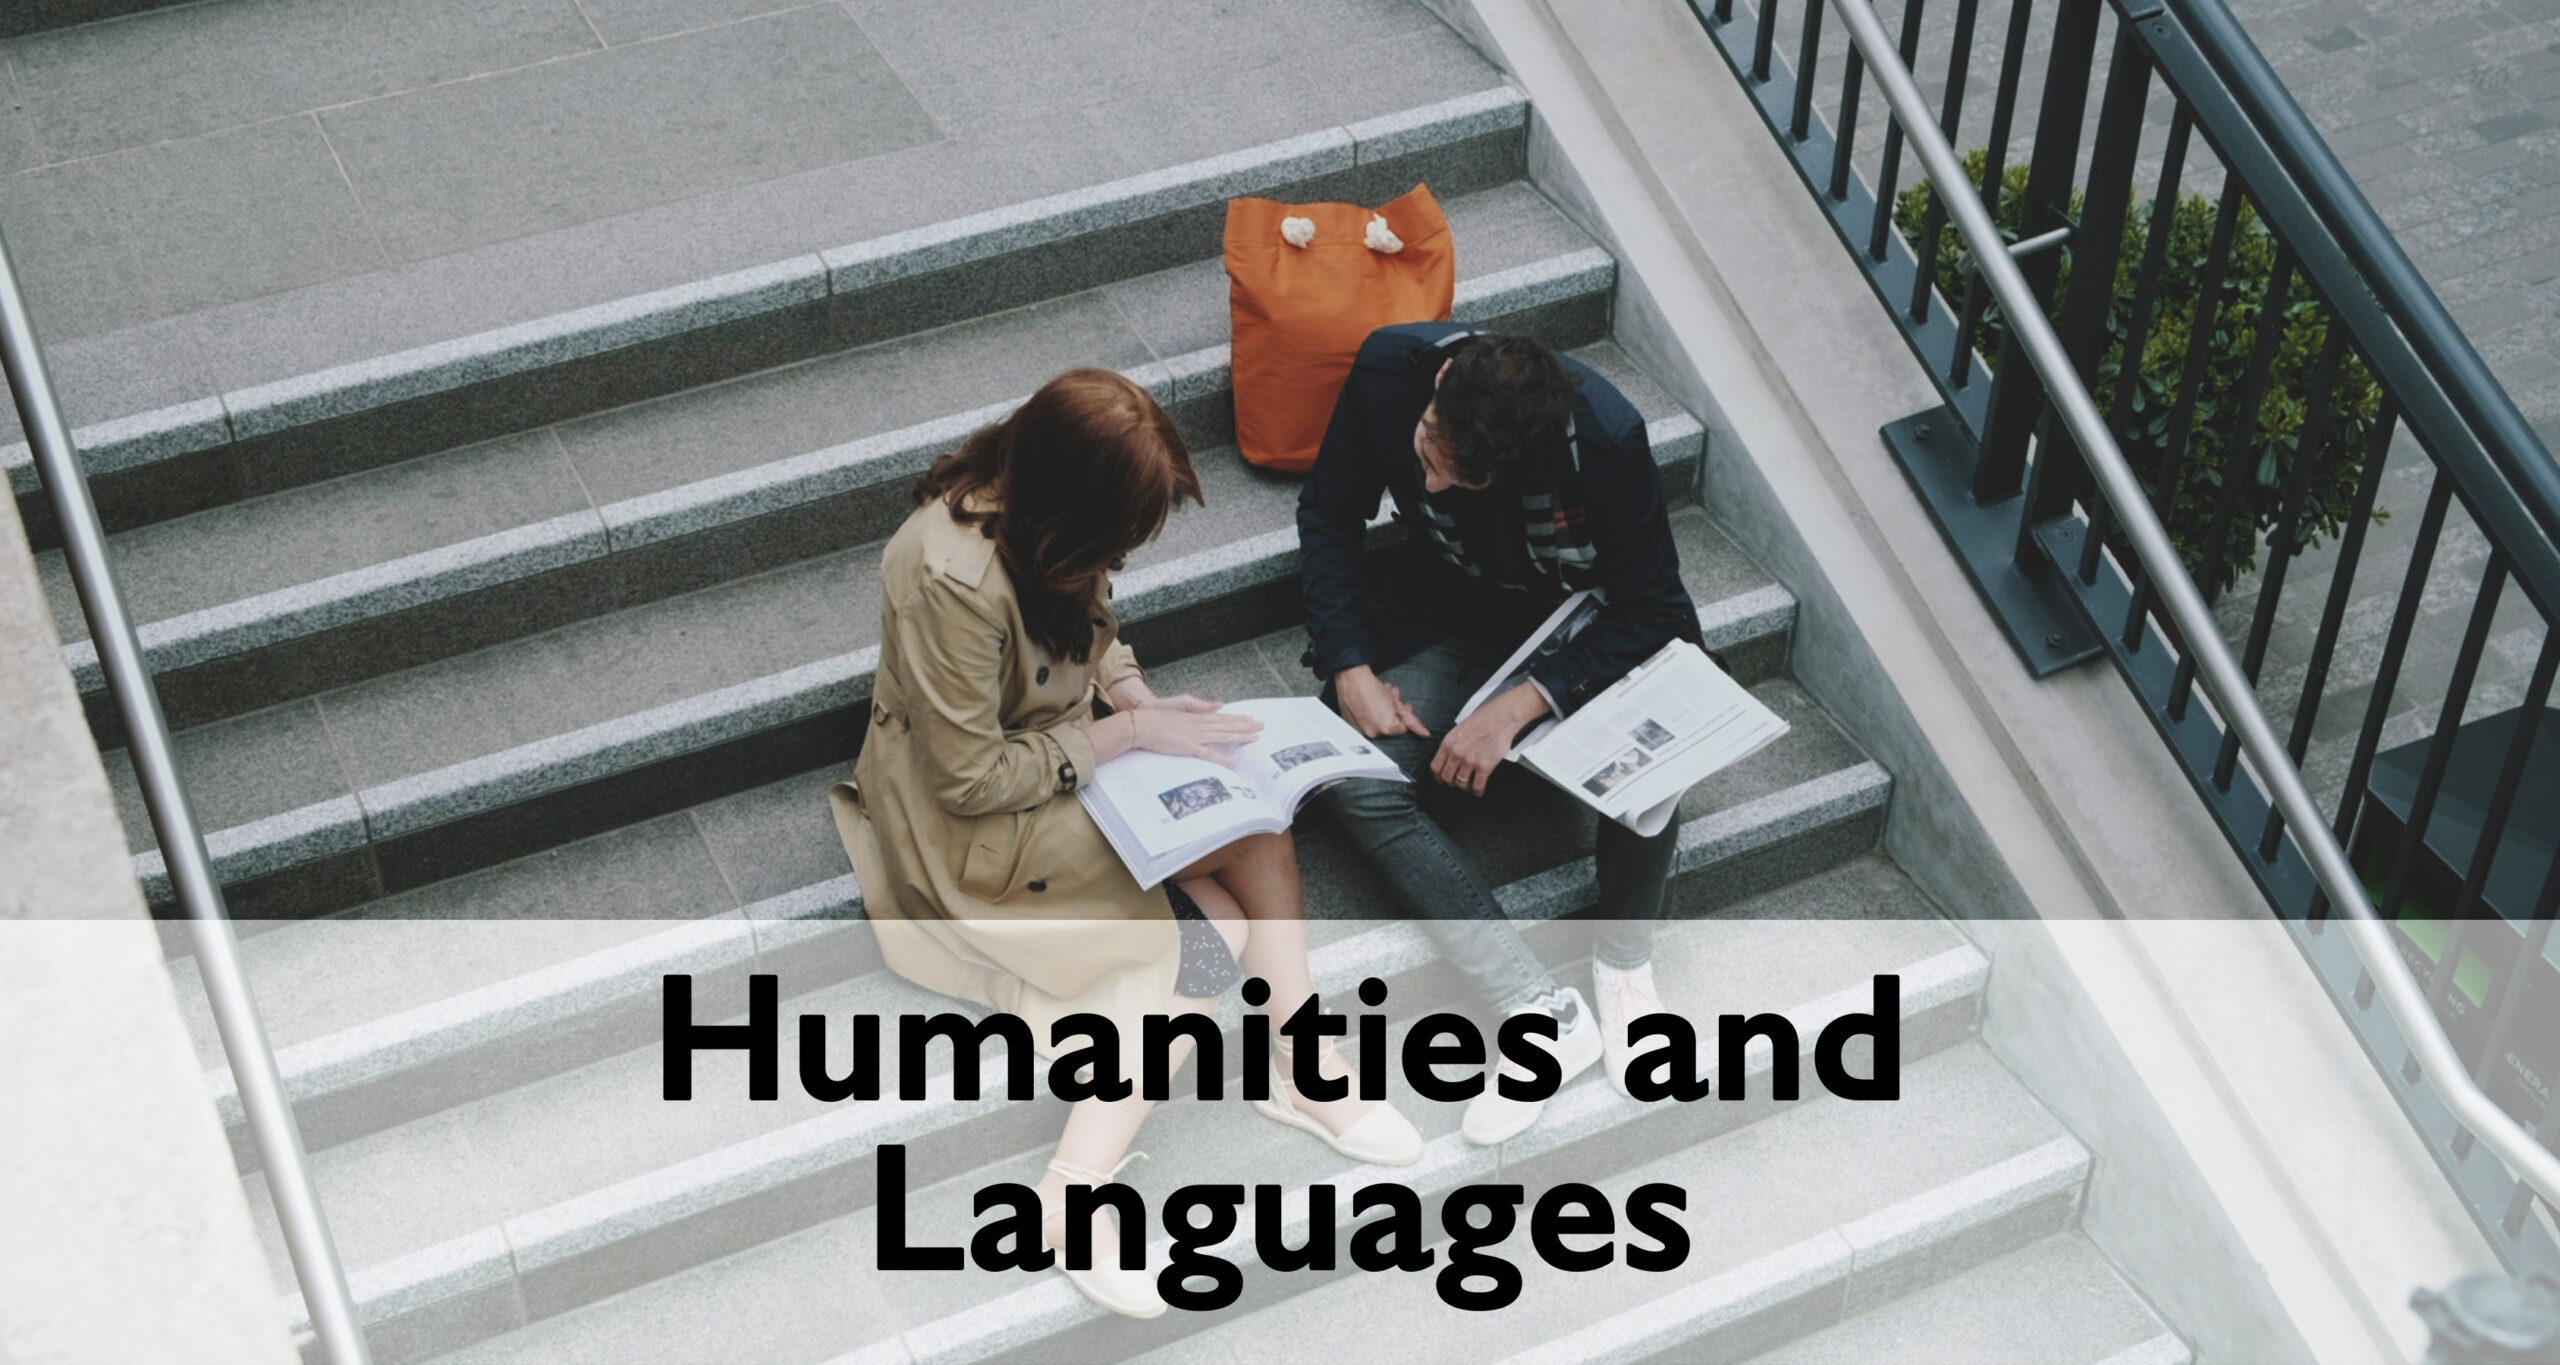 Click image to get to the Humanities and Languages pathway web page.